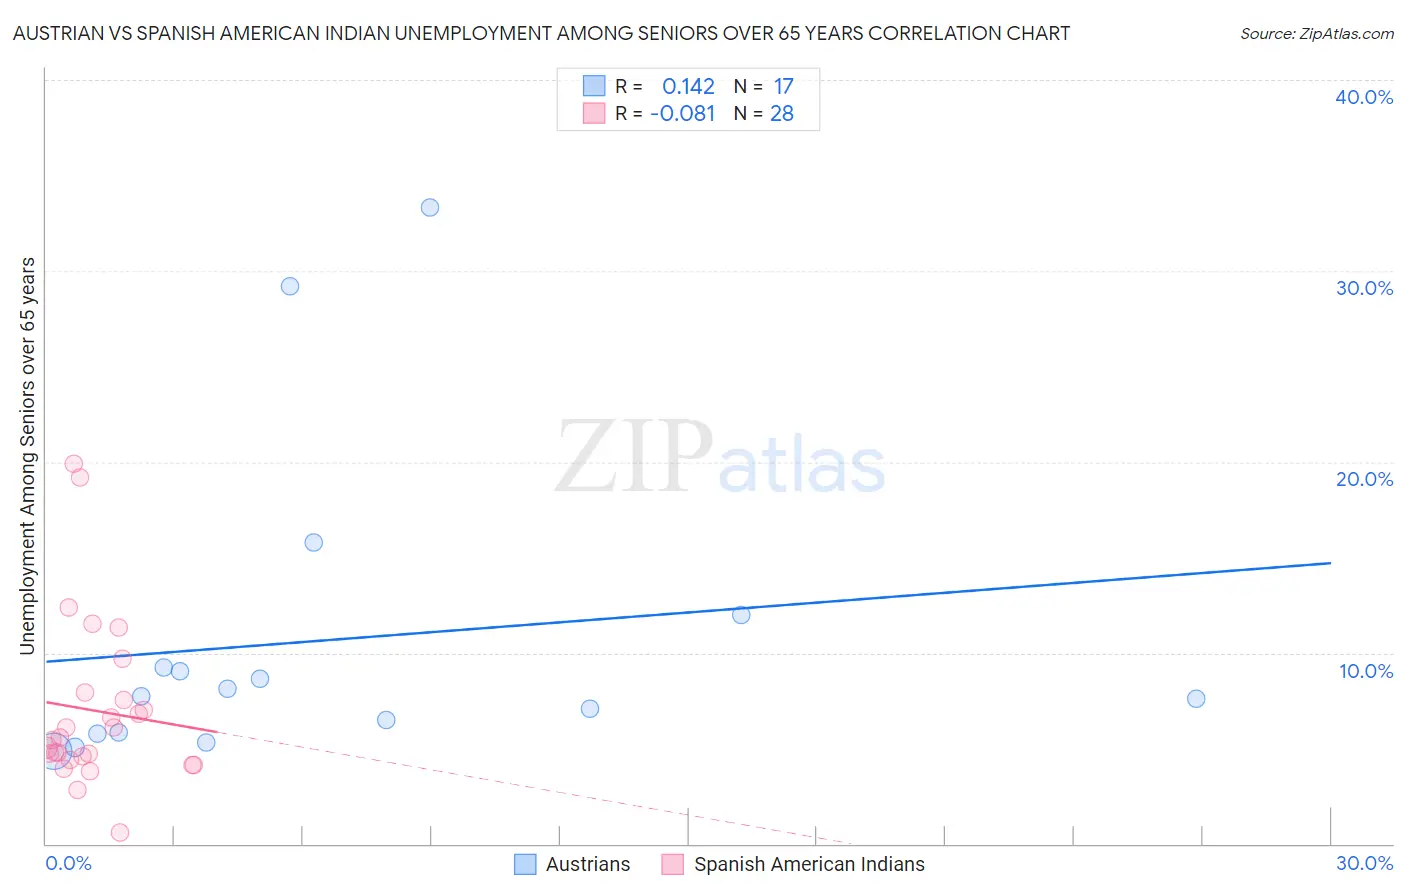 Austrian vs Spanish American Indian Unemployment Among Seniors over 65 years